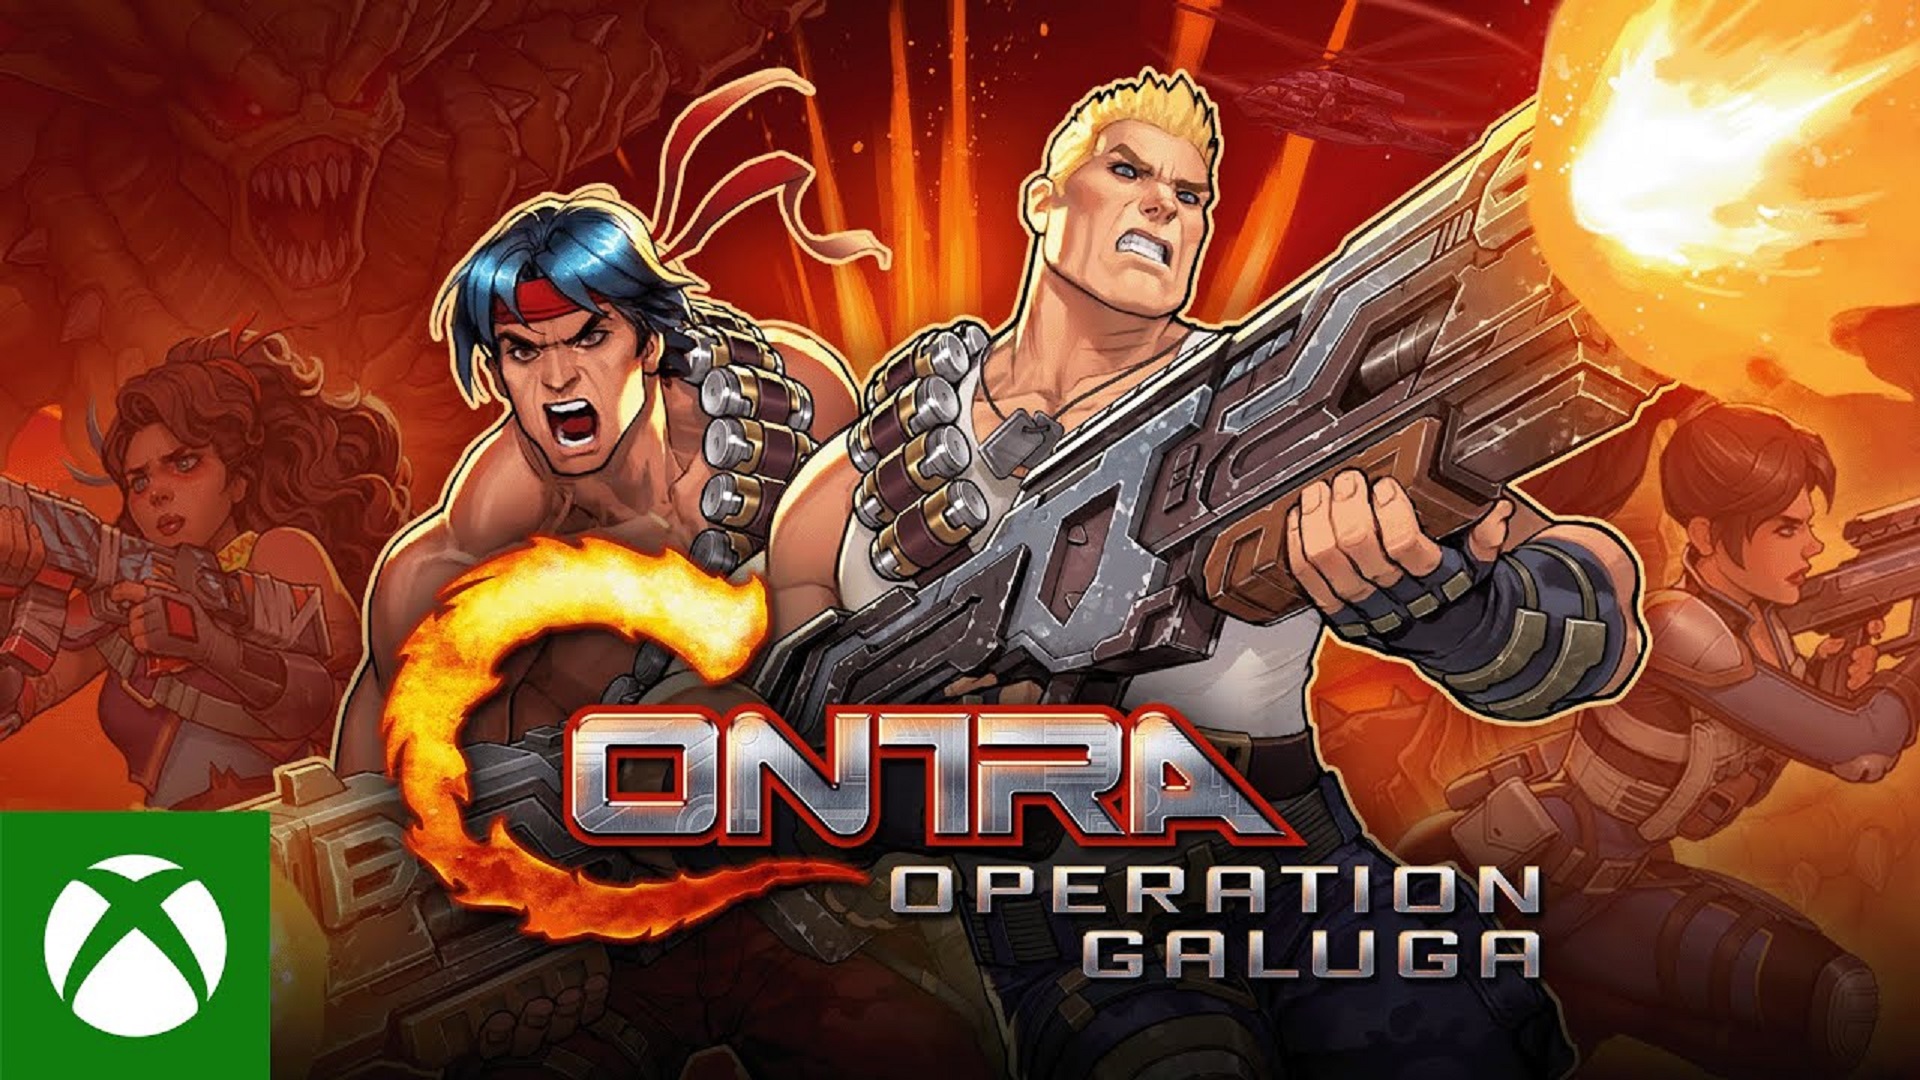 Contra Anniversary collection. Contra Operation Galuga игра. Lcontra - Operation Galuga. Картинки игры contra: Operation Galuga. Contra galuga ps4